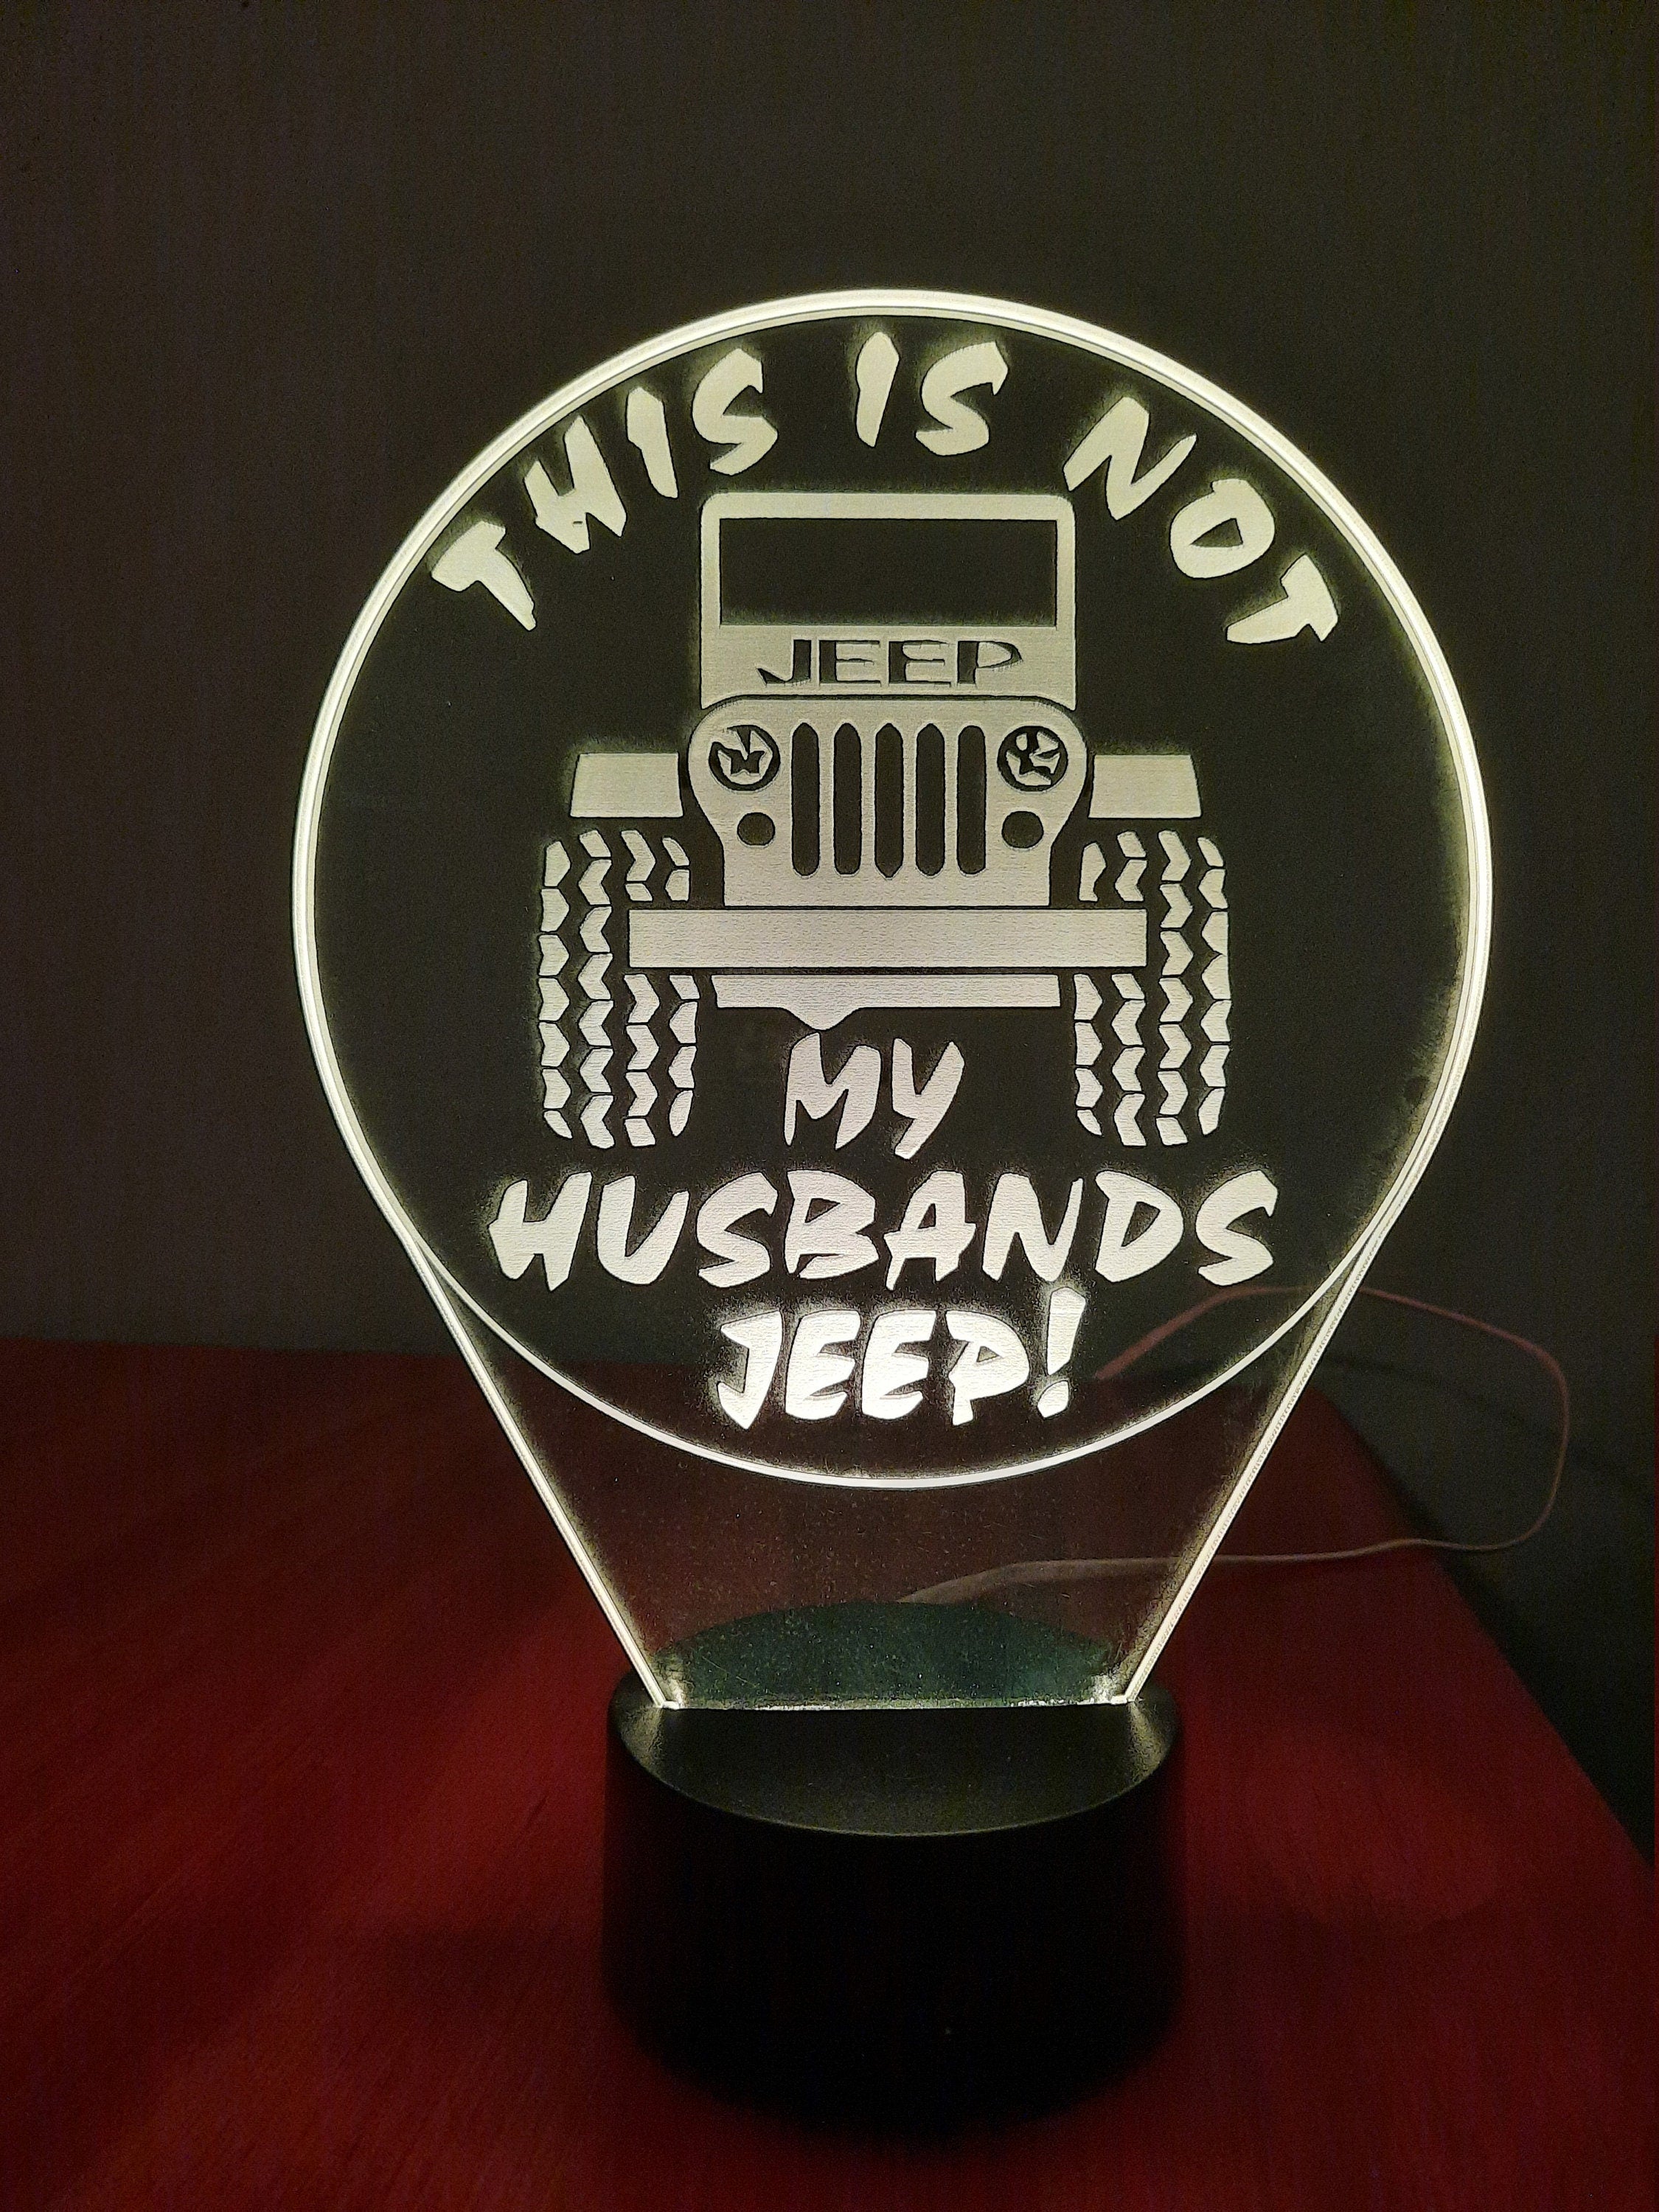 Awesome "This is NOT my Husbands Jeep" LED Lamp (1260)